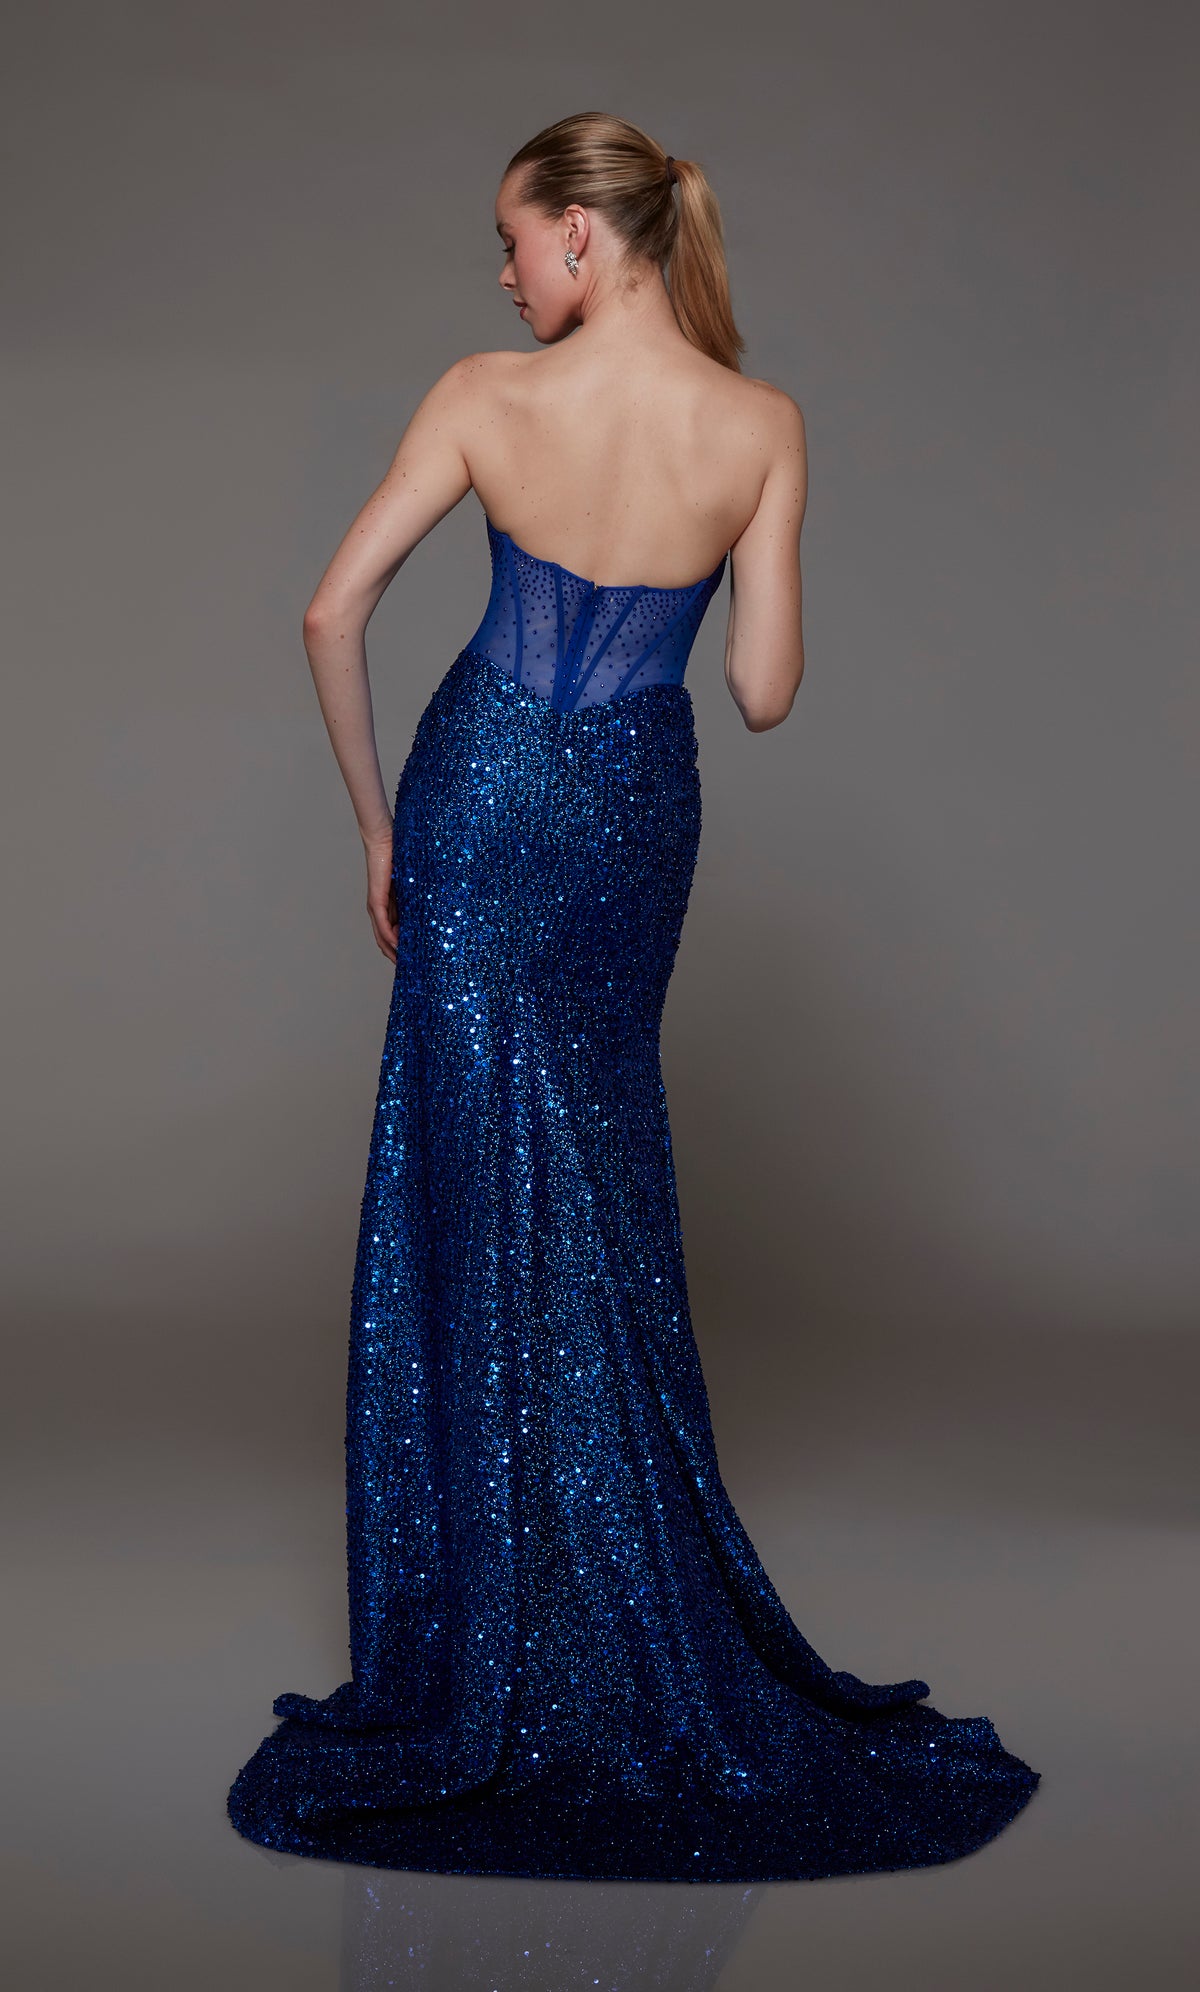 Captivating royal blue strapless prom dress with intricate sequin detailing, corset bodice with an zip up back, and an graceful train for an red-carpet-worthy look.